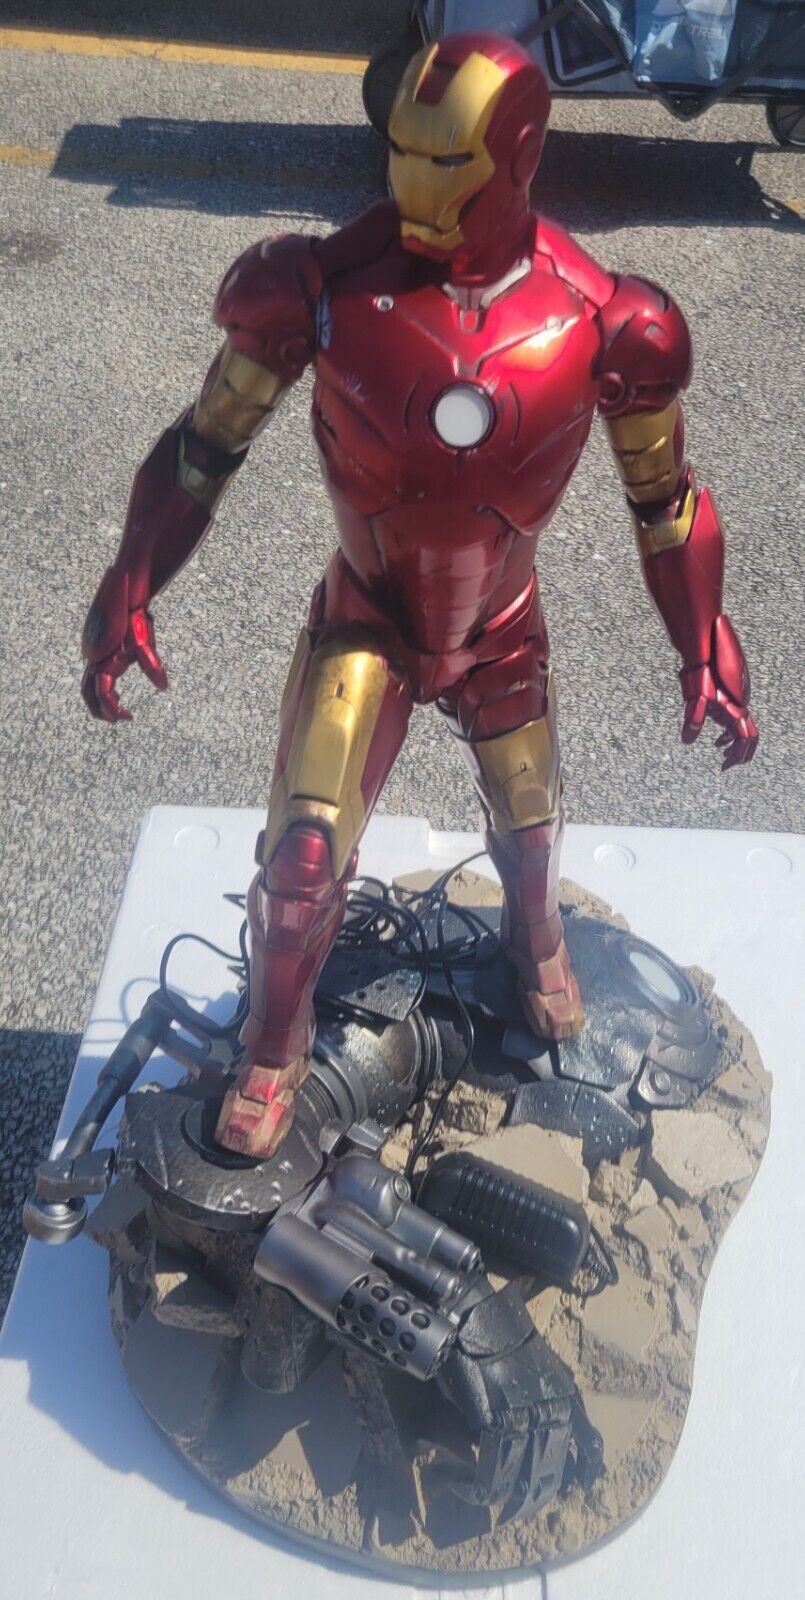 Sideshow Iron Man Mark III Maquette Collector Edition Original Box and Packaging